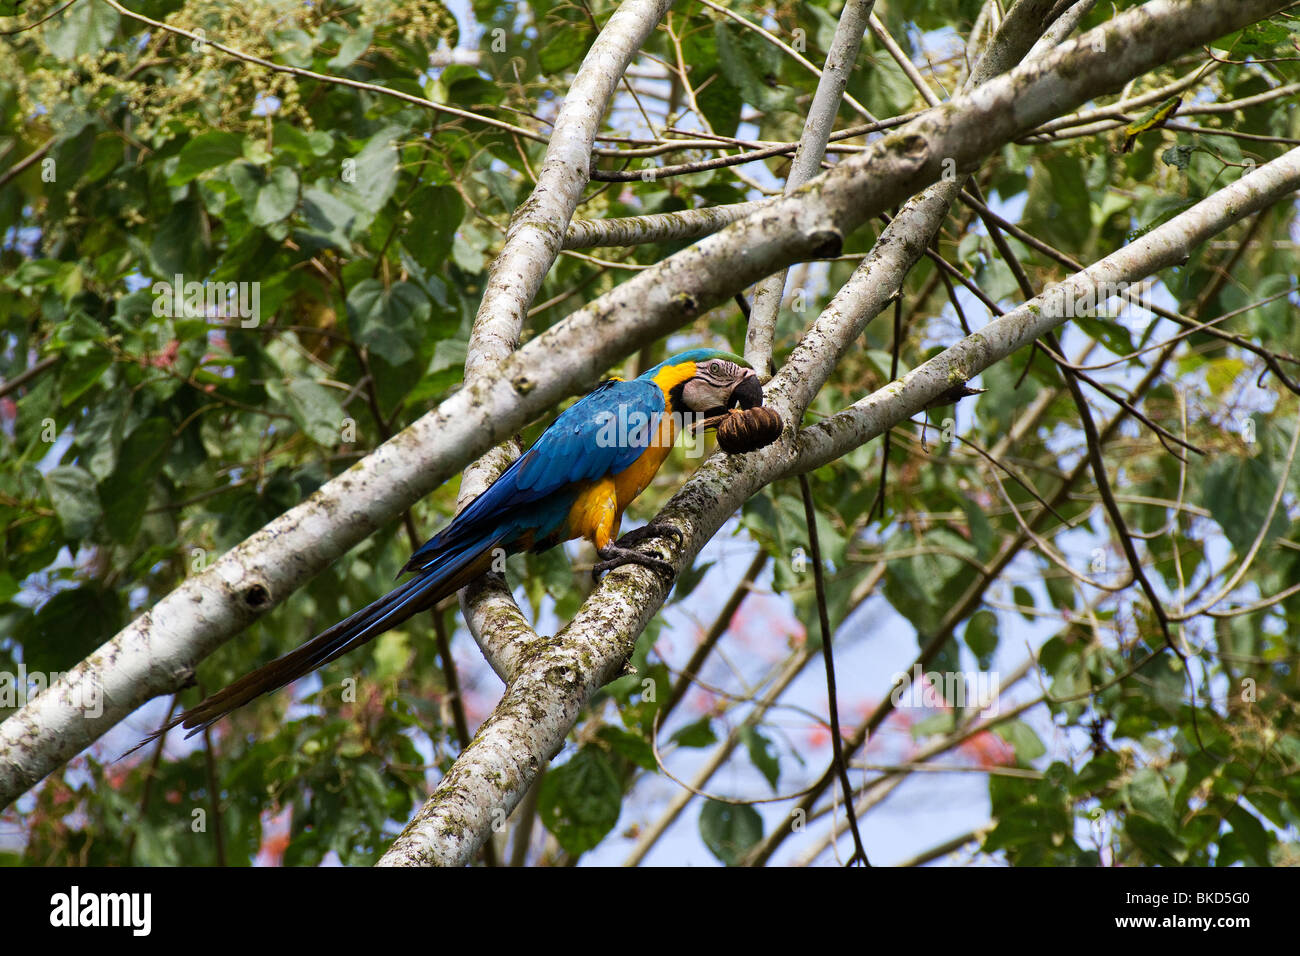 BT-278D; BLUE-AND-YELLOW MACAW WITH SEED POD Stock Photo